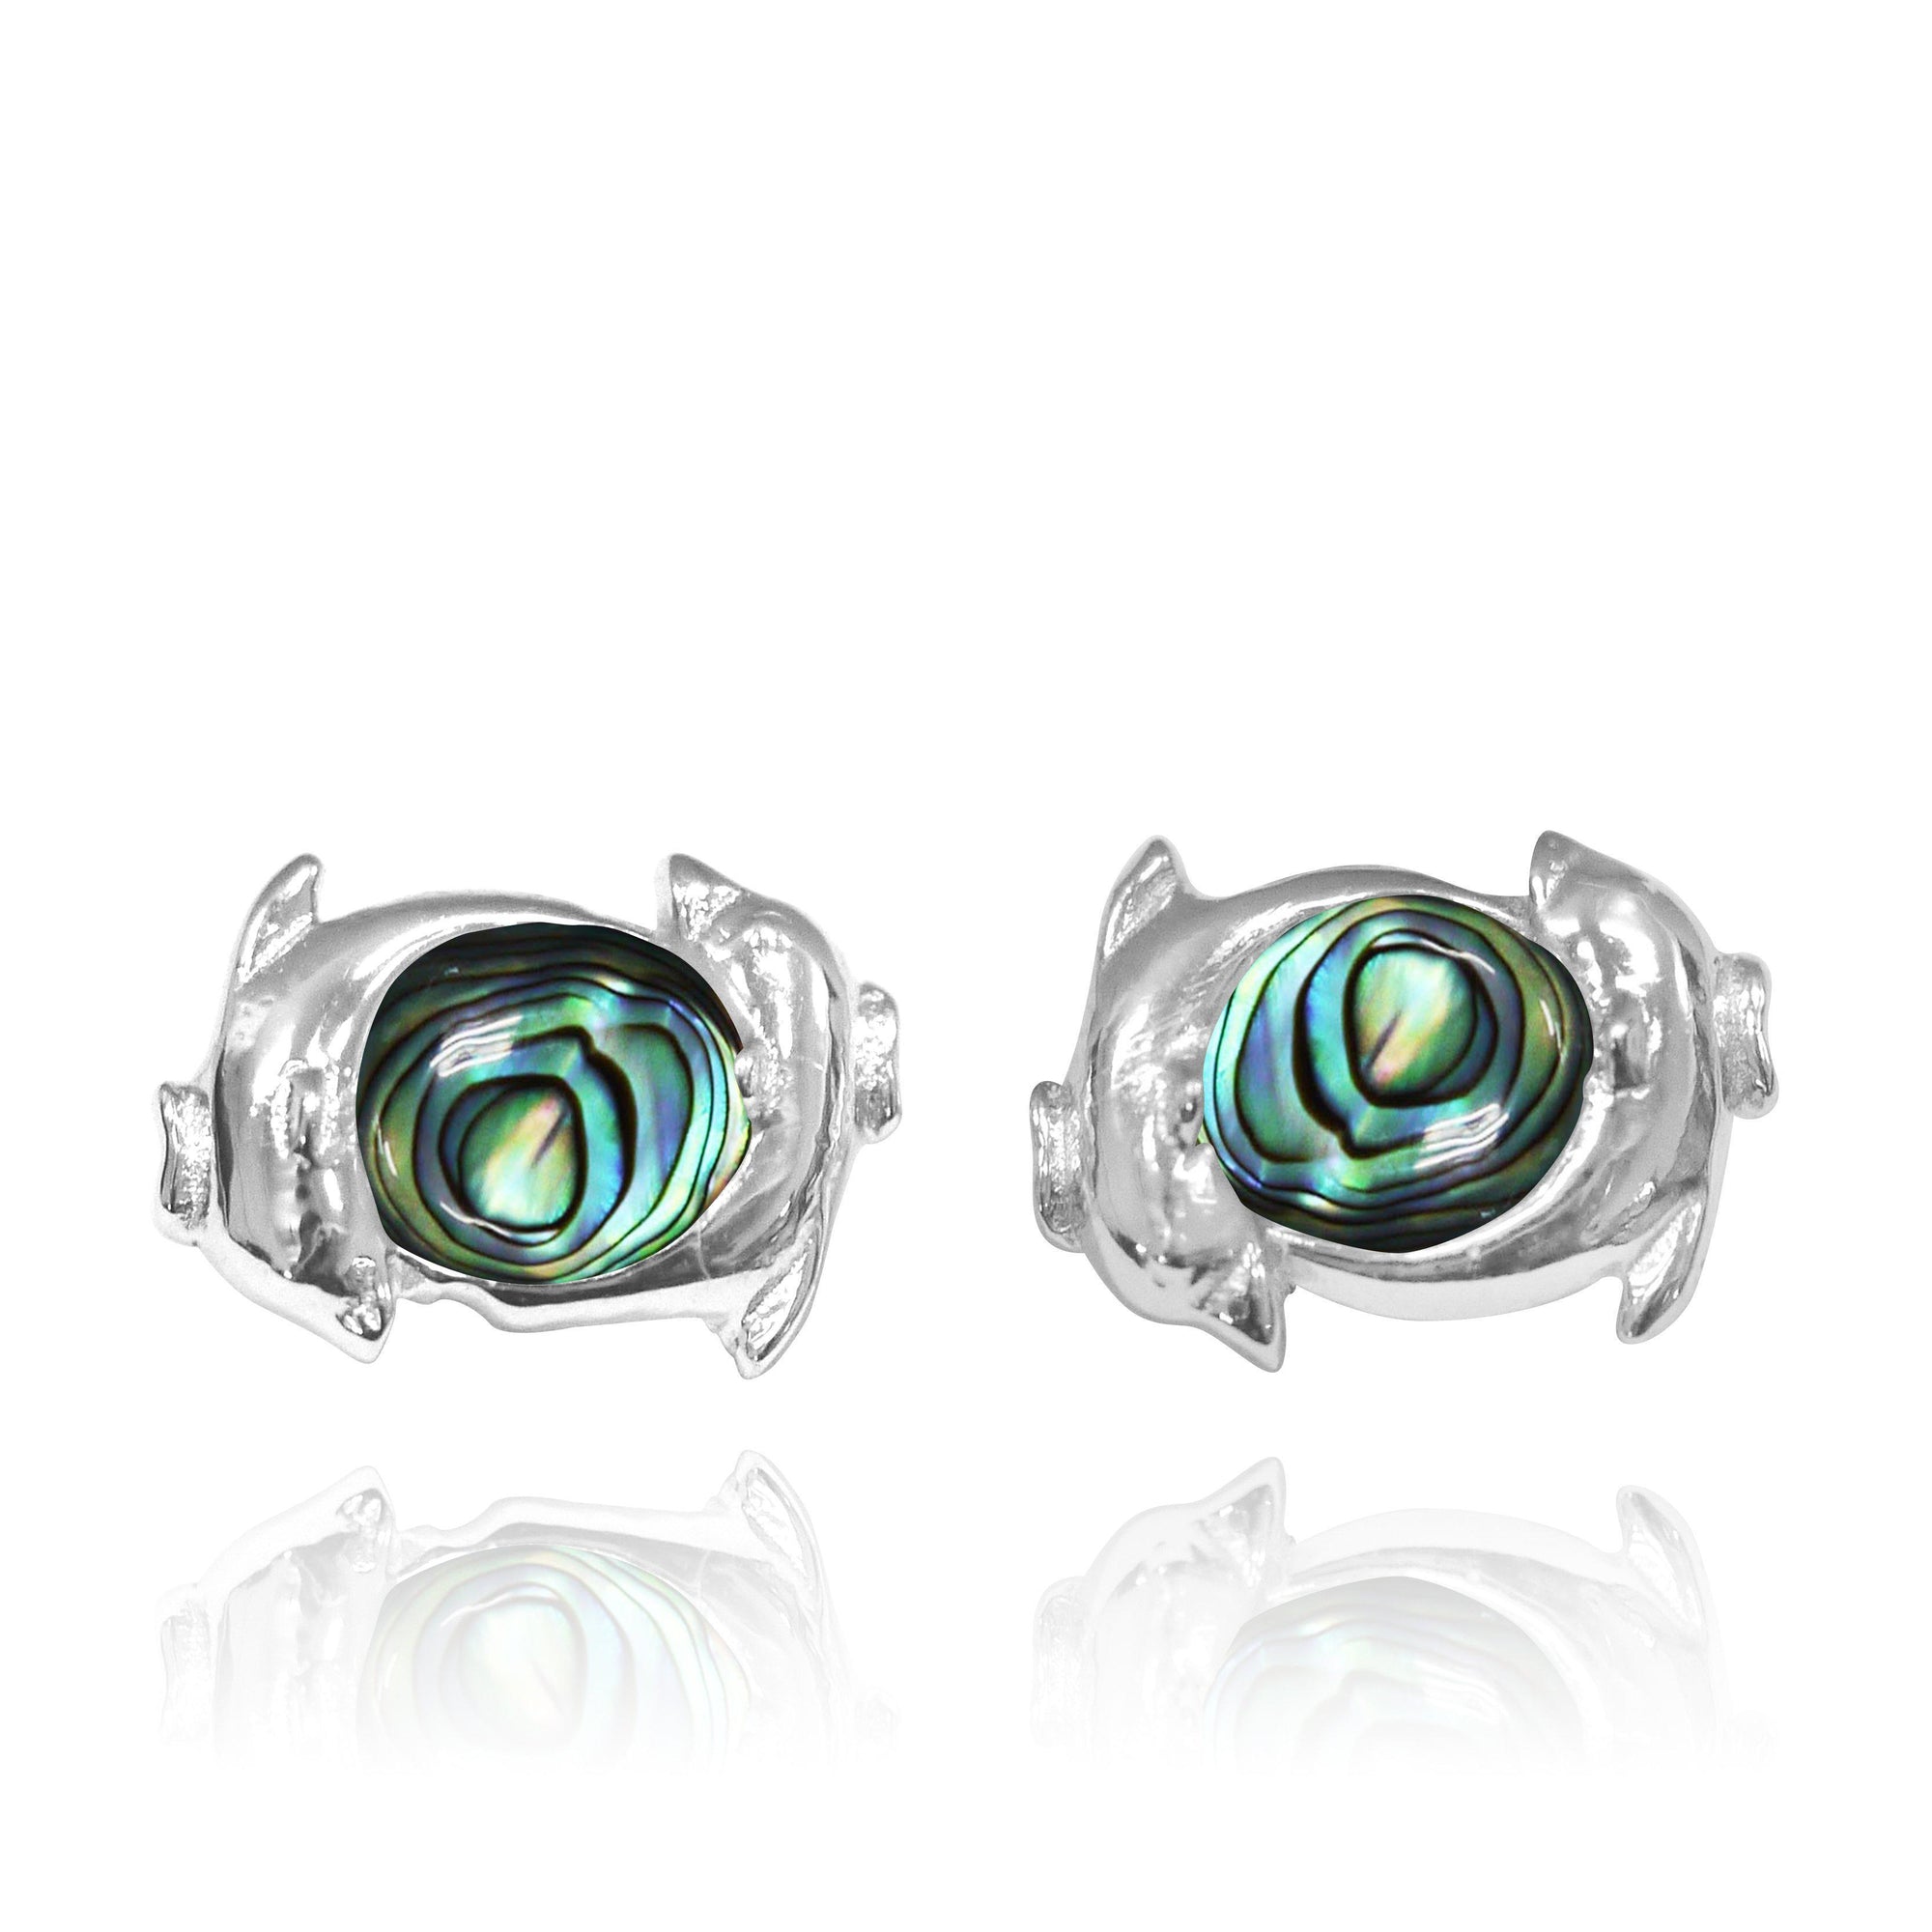 Dolphin Stud Earrings with Abalone Shell